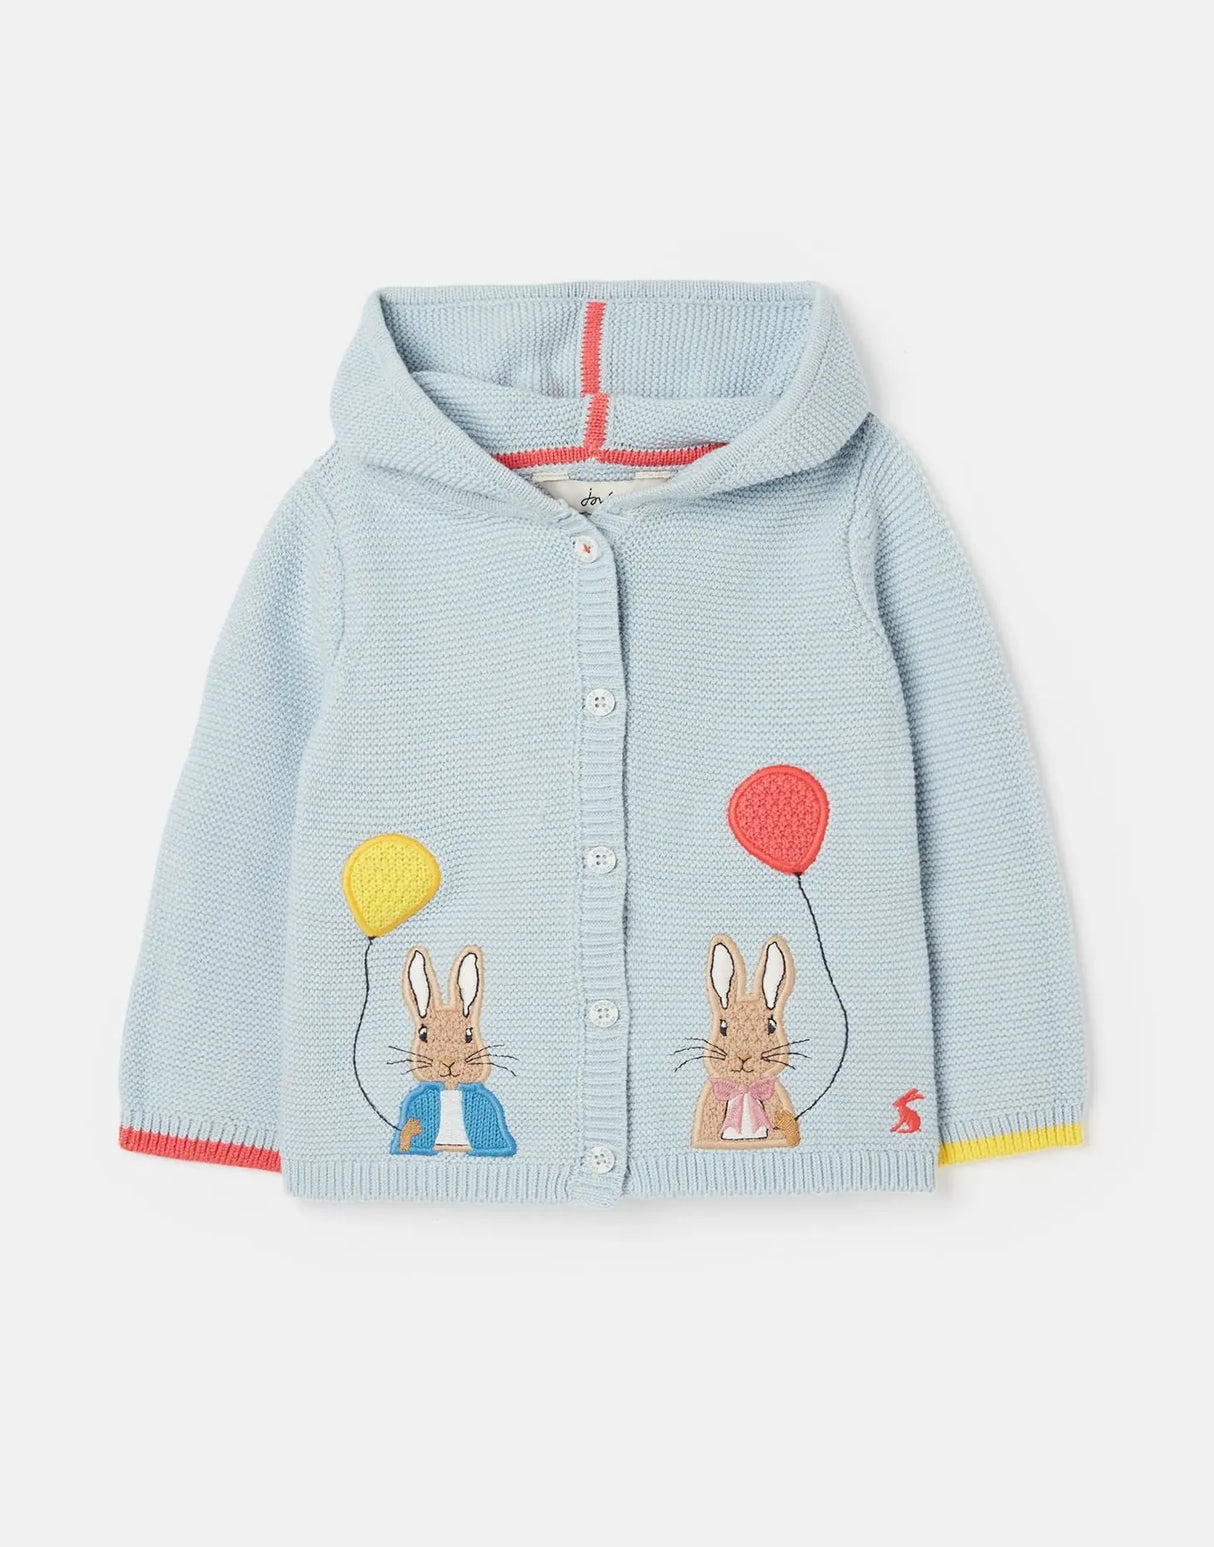 Peter Rabbit Charmford Hooded Cardigan | Joules - Joules